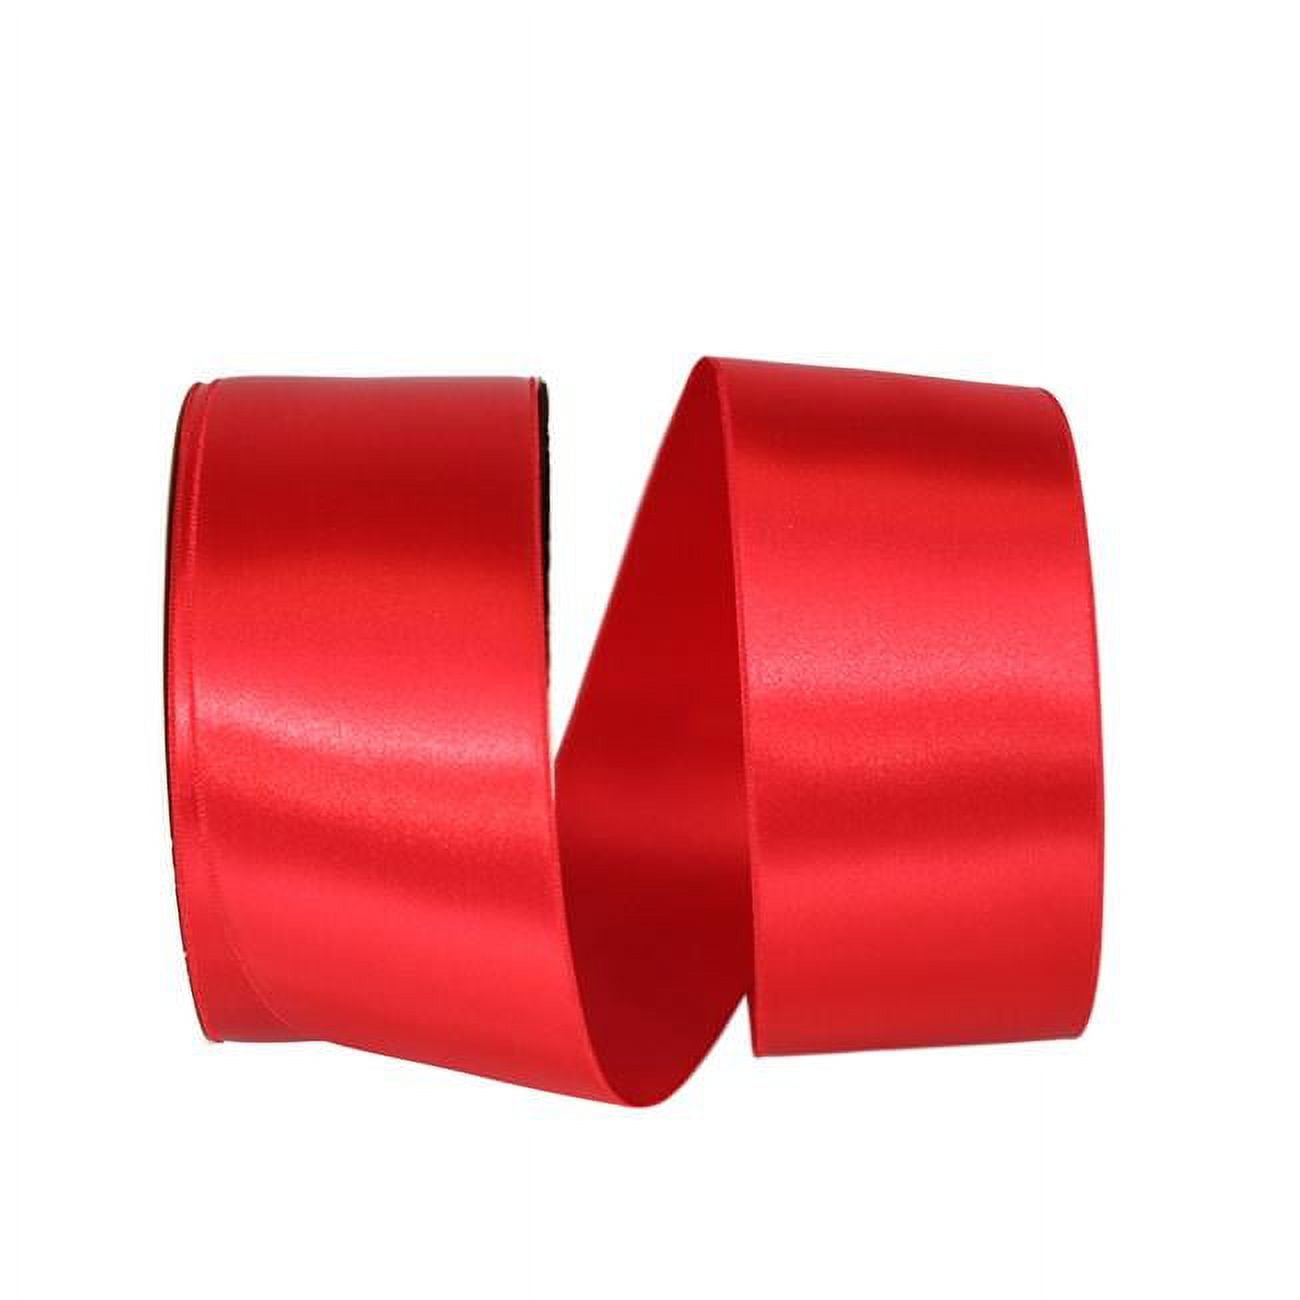  Maclemon 1 inch Wide 100 Yards Double Face Red Satin